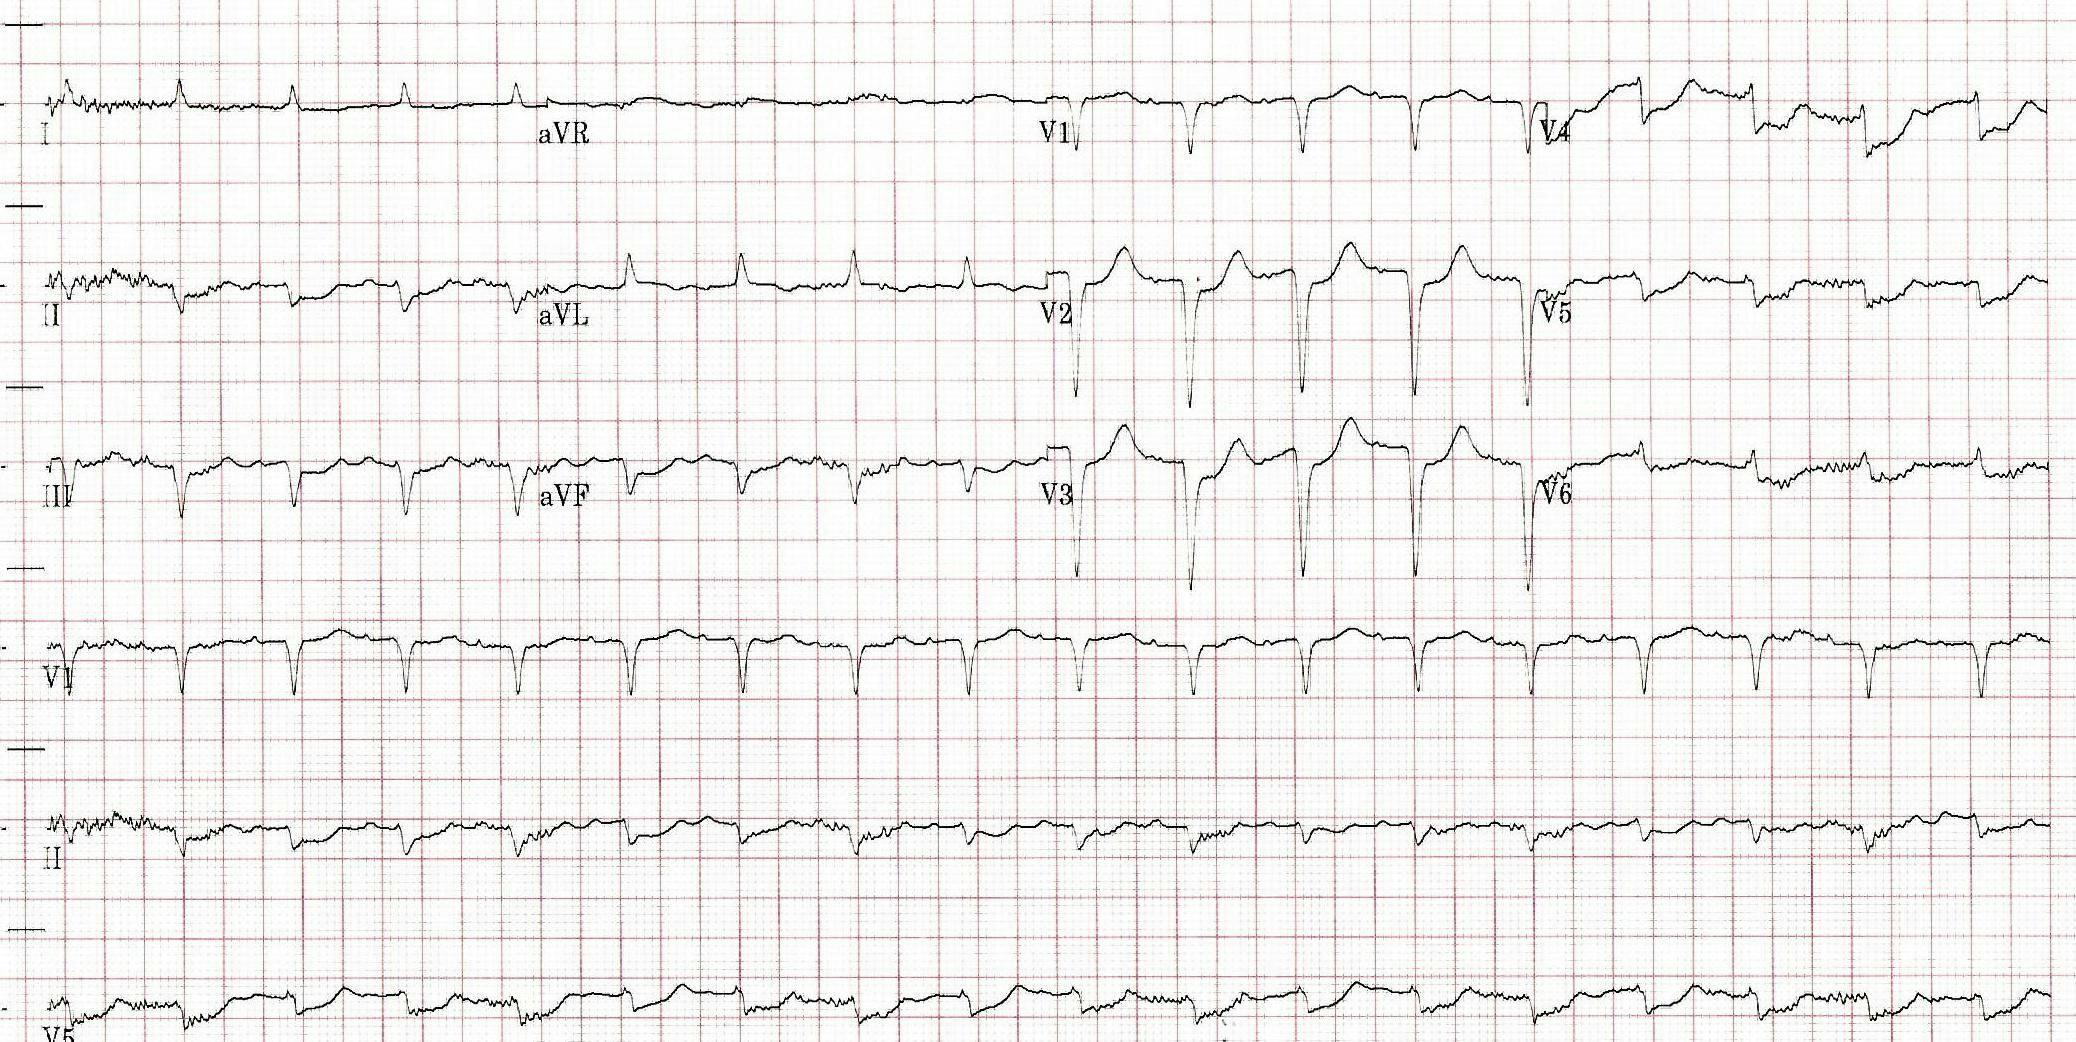 ECG of an elderly patient brought to the hospital with diabetic ketoacidosis